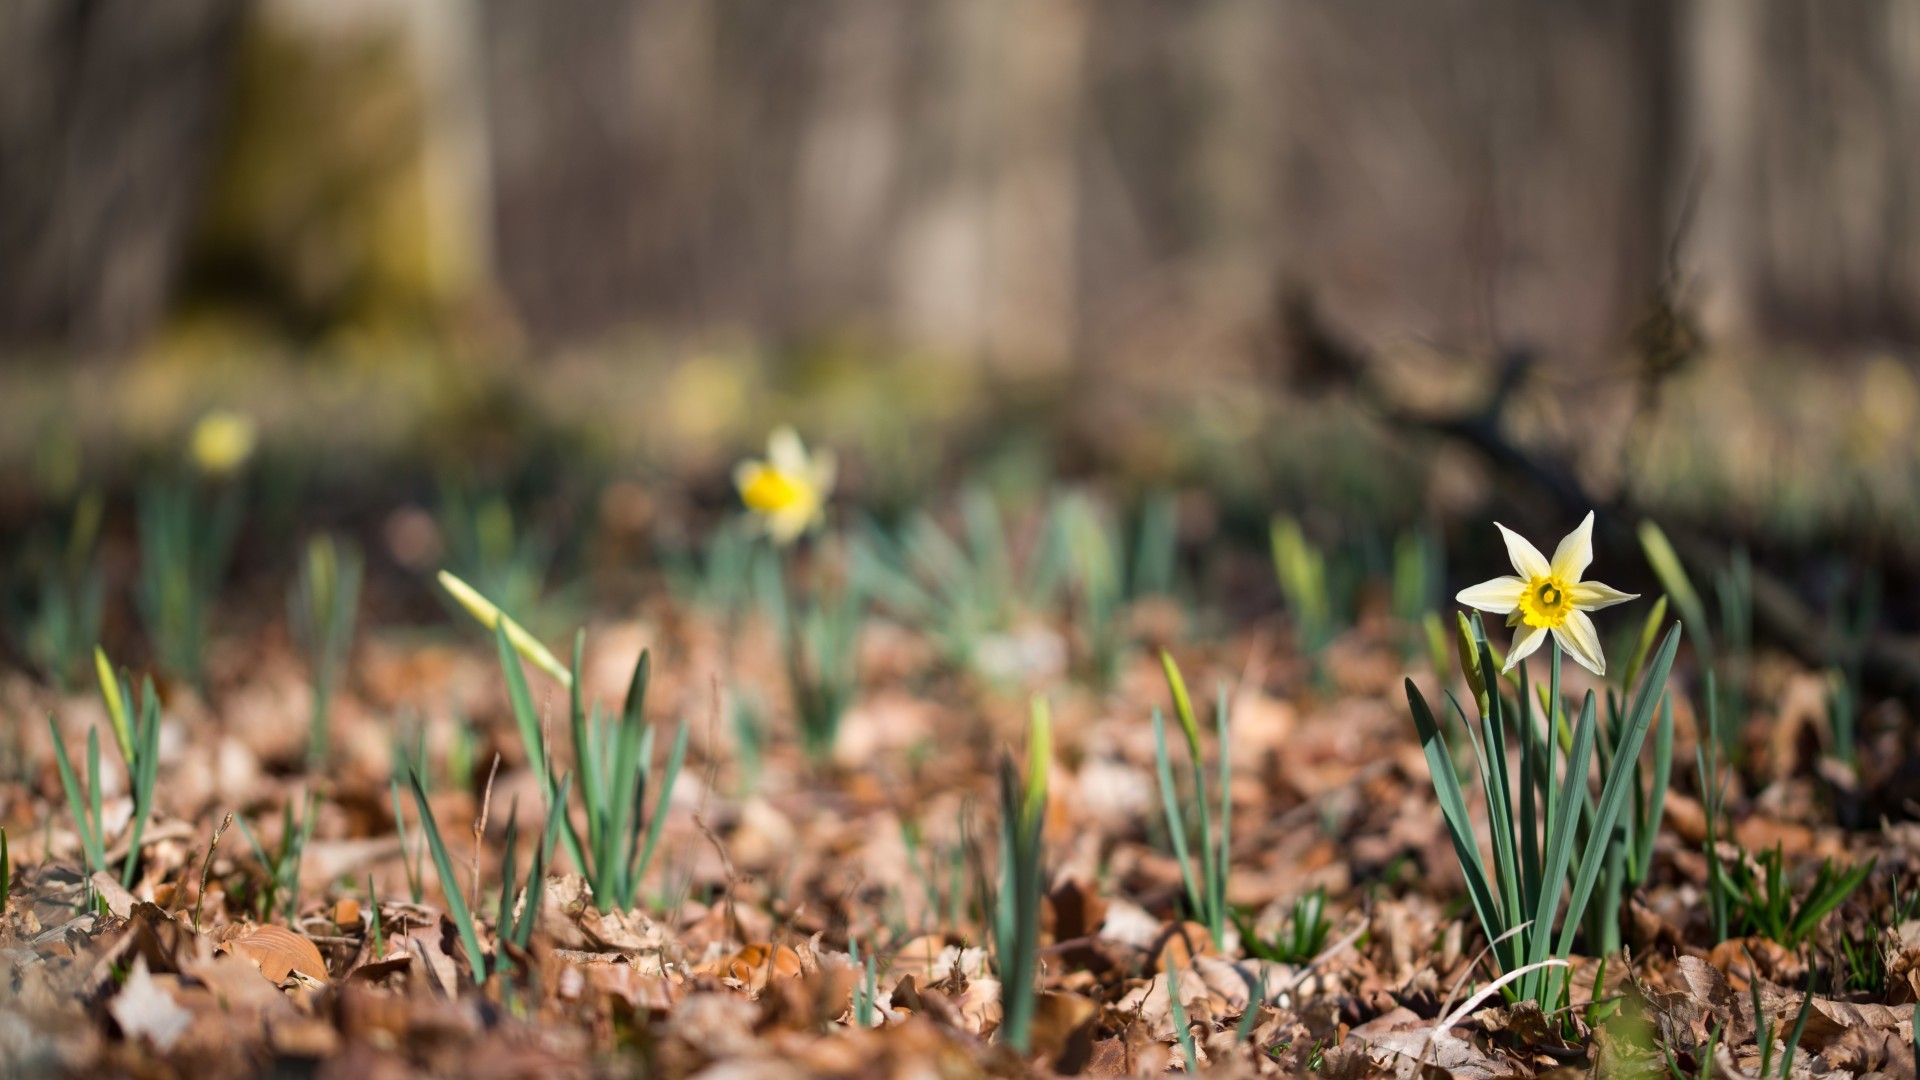 General 1920x1080 depth of field flowers nature daffodils plants outdoors